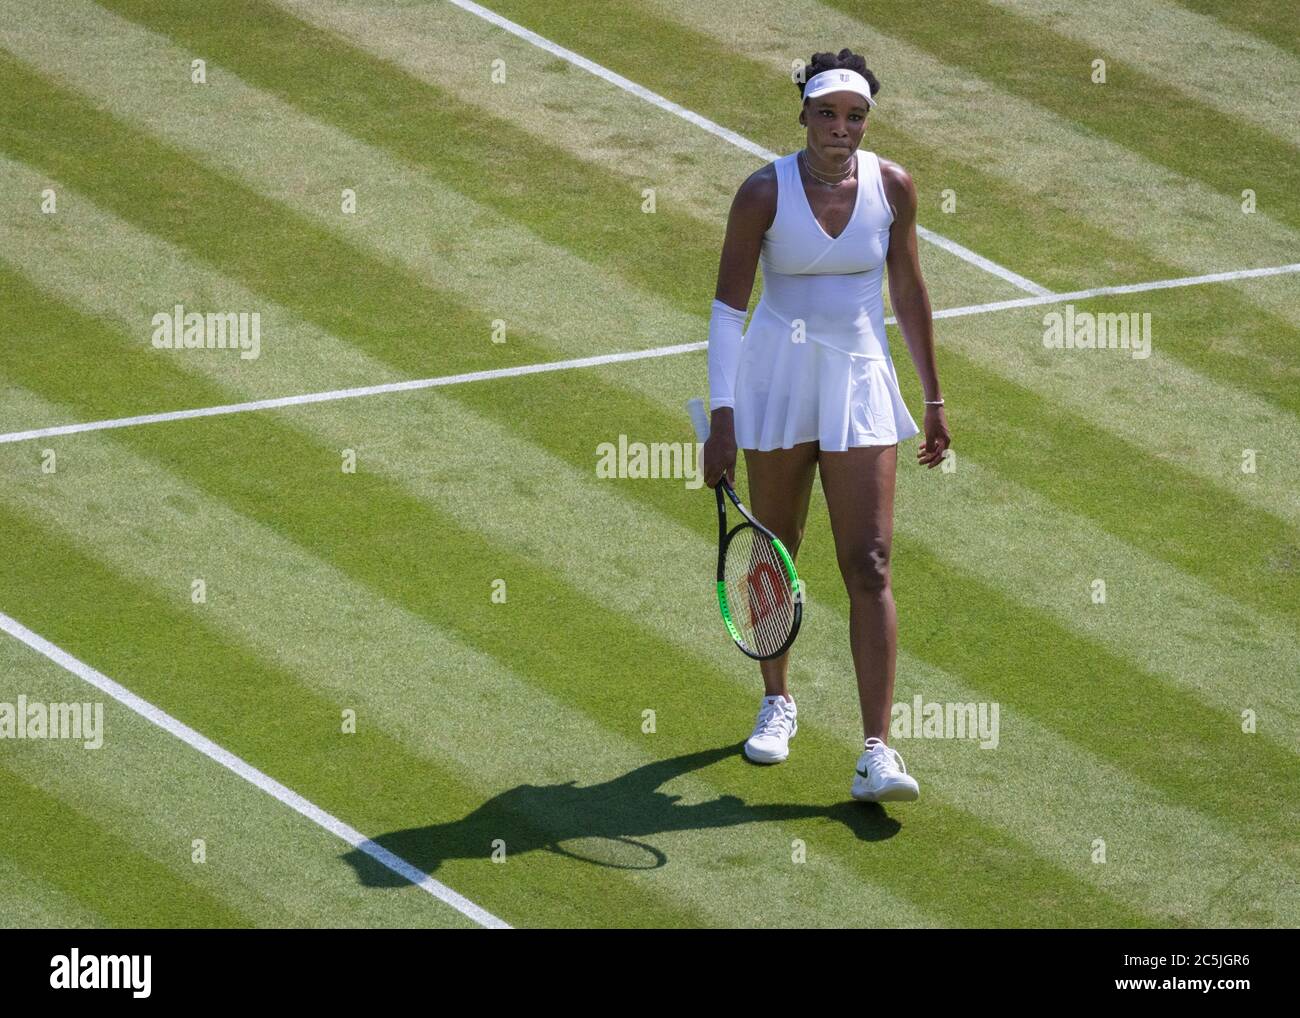 American Tennis player Venus Williams in a match at The Championships 2018, Wimbledon All England Lawn Tennis Club, London, UK Stock Photo